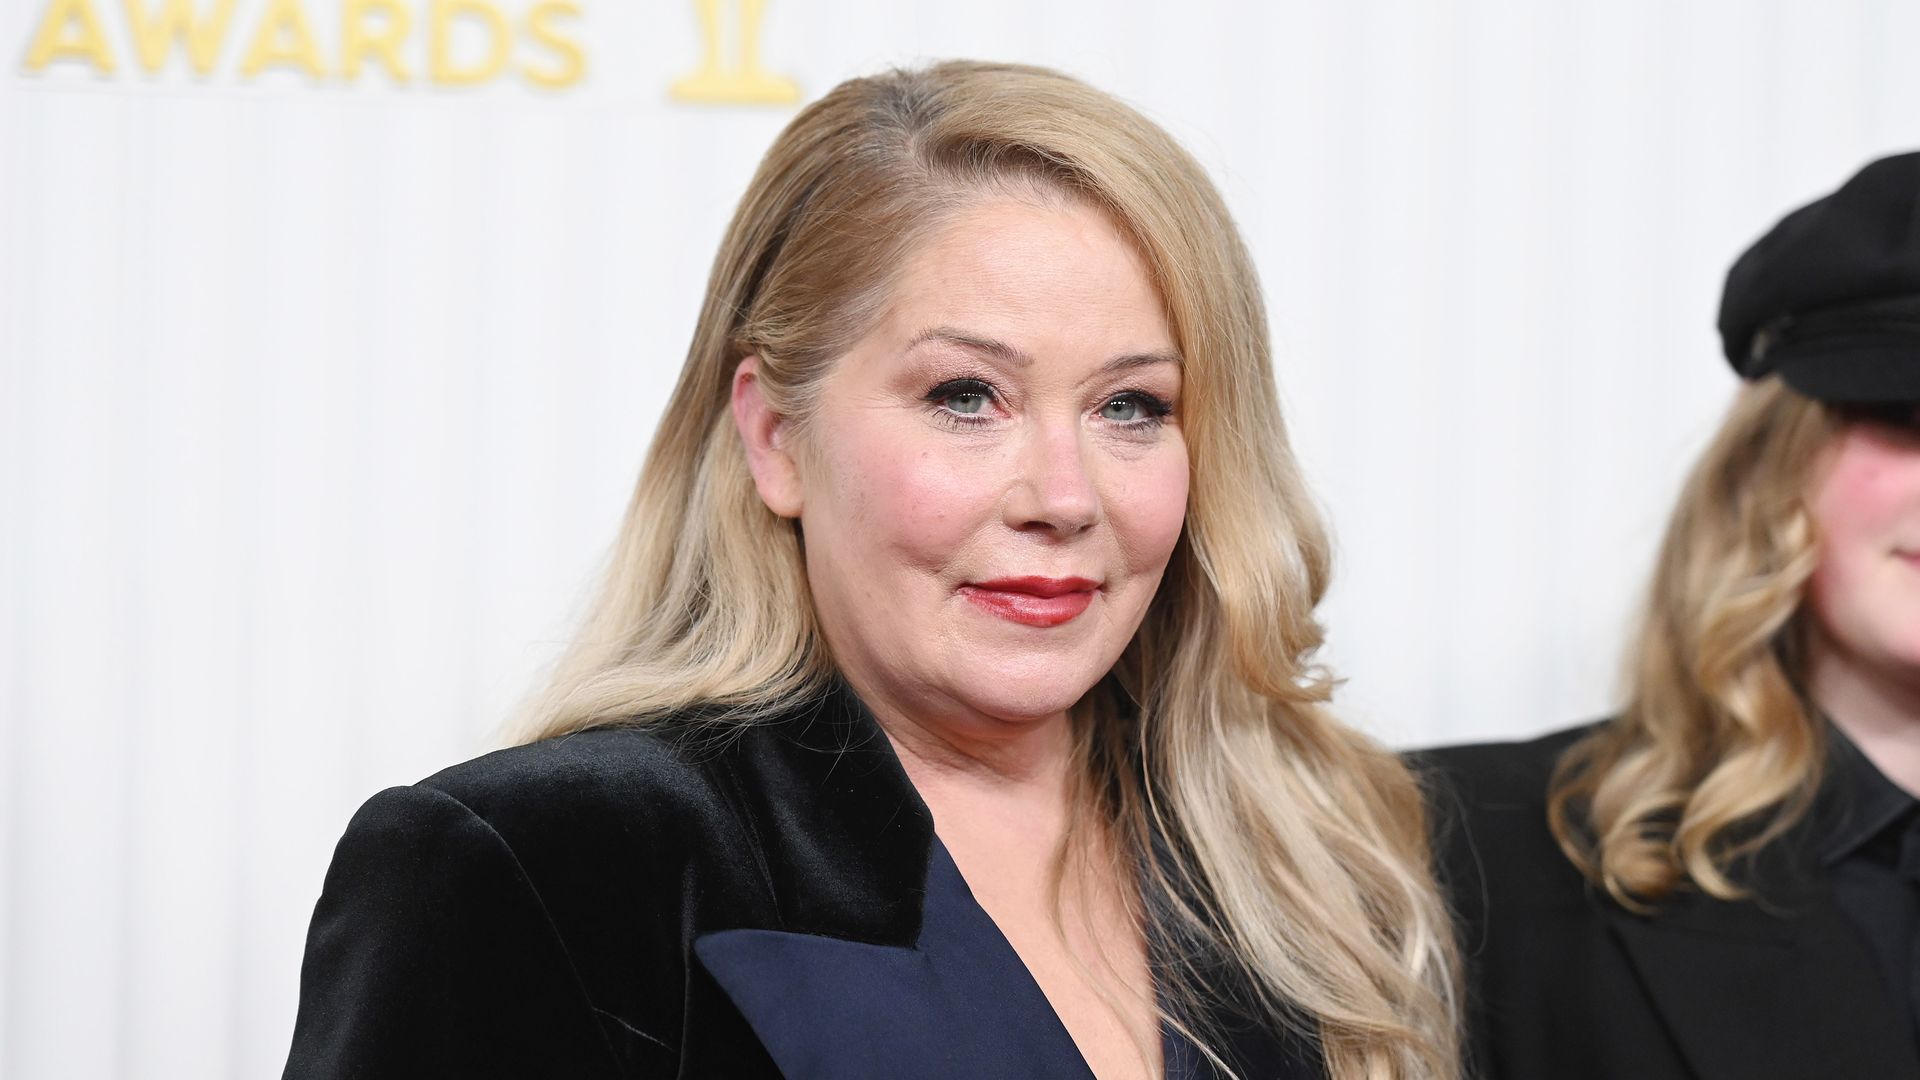 Christina Applegate admits her depression is 'scaring' her amid MS battle: 'I'm trapped in darkness'